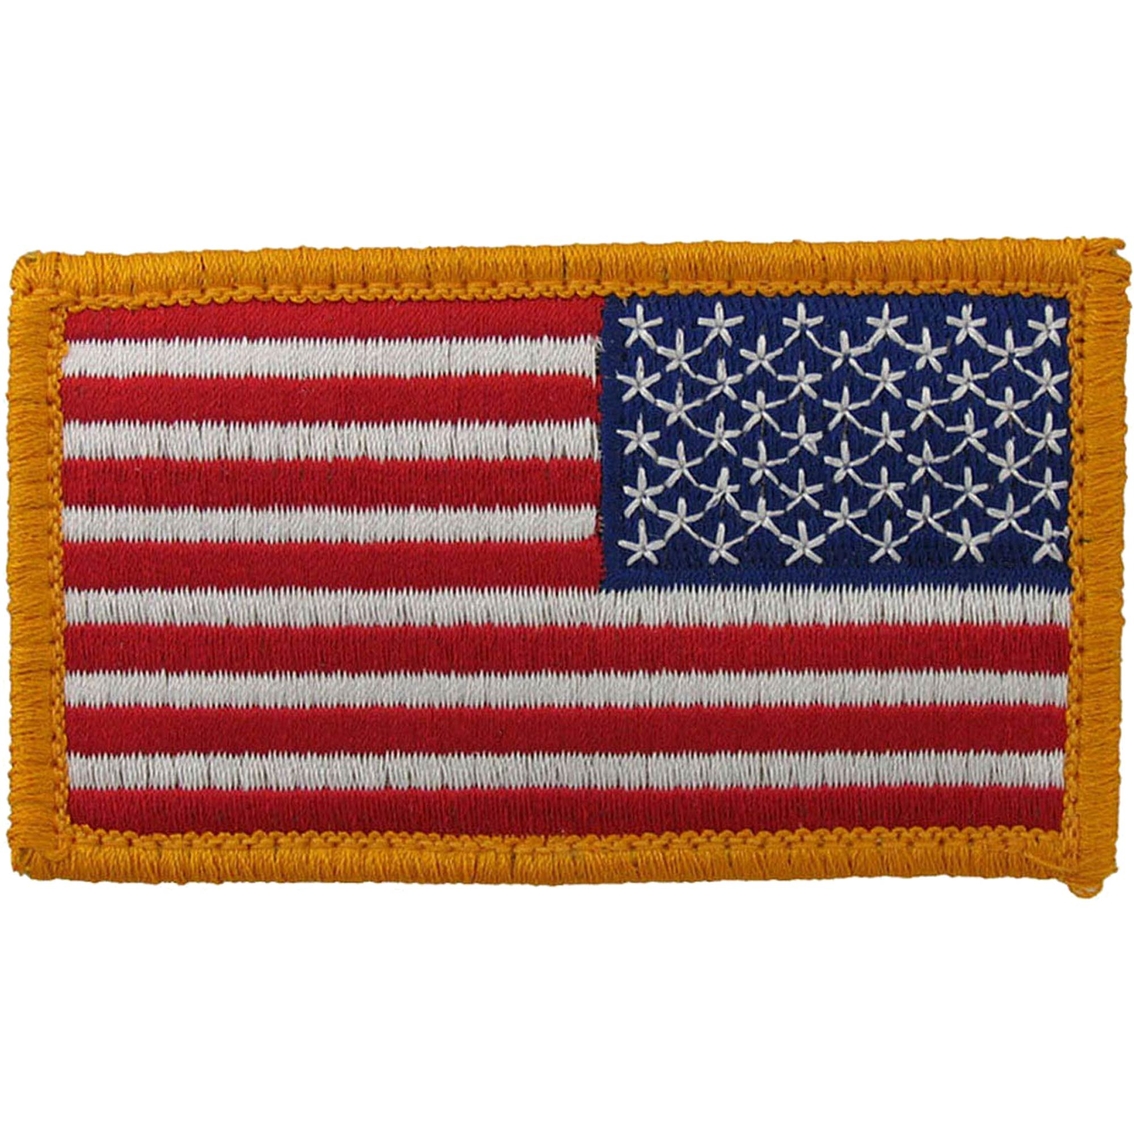 USA MILITARY FLAG PATCH…ARMY NATIONAL GUARD…AMERICANS AT THEIR BEST